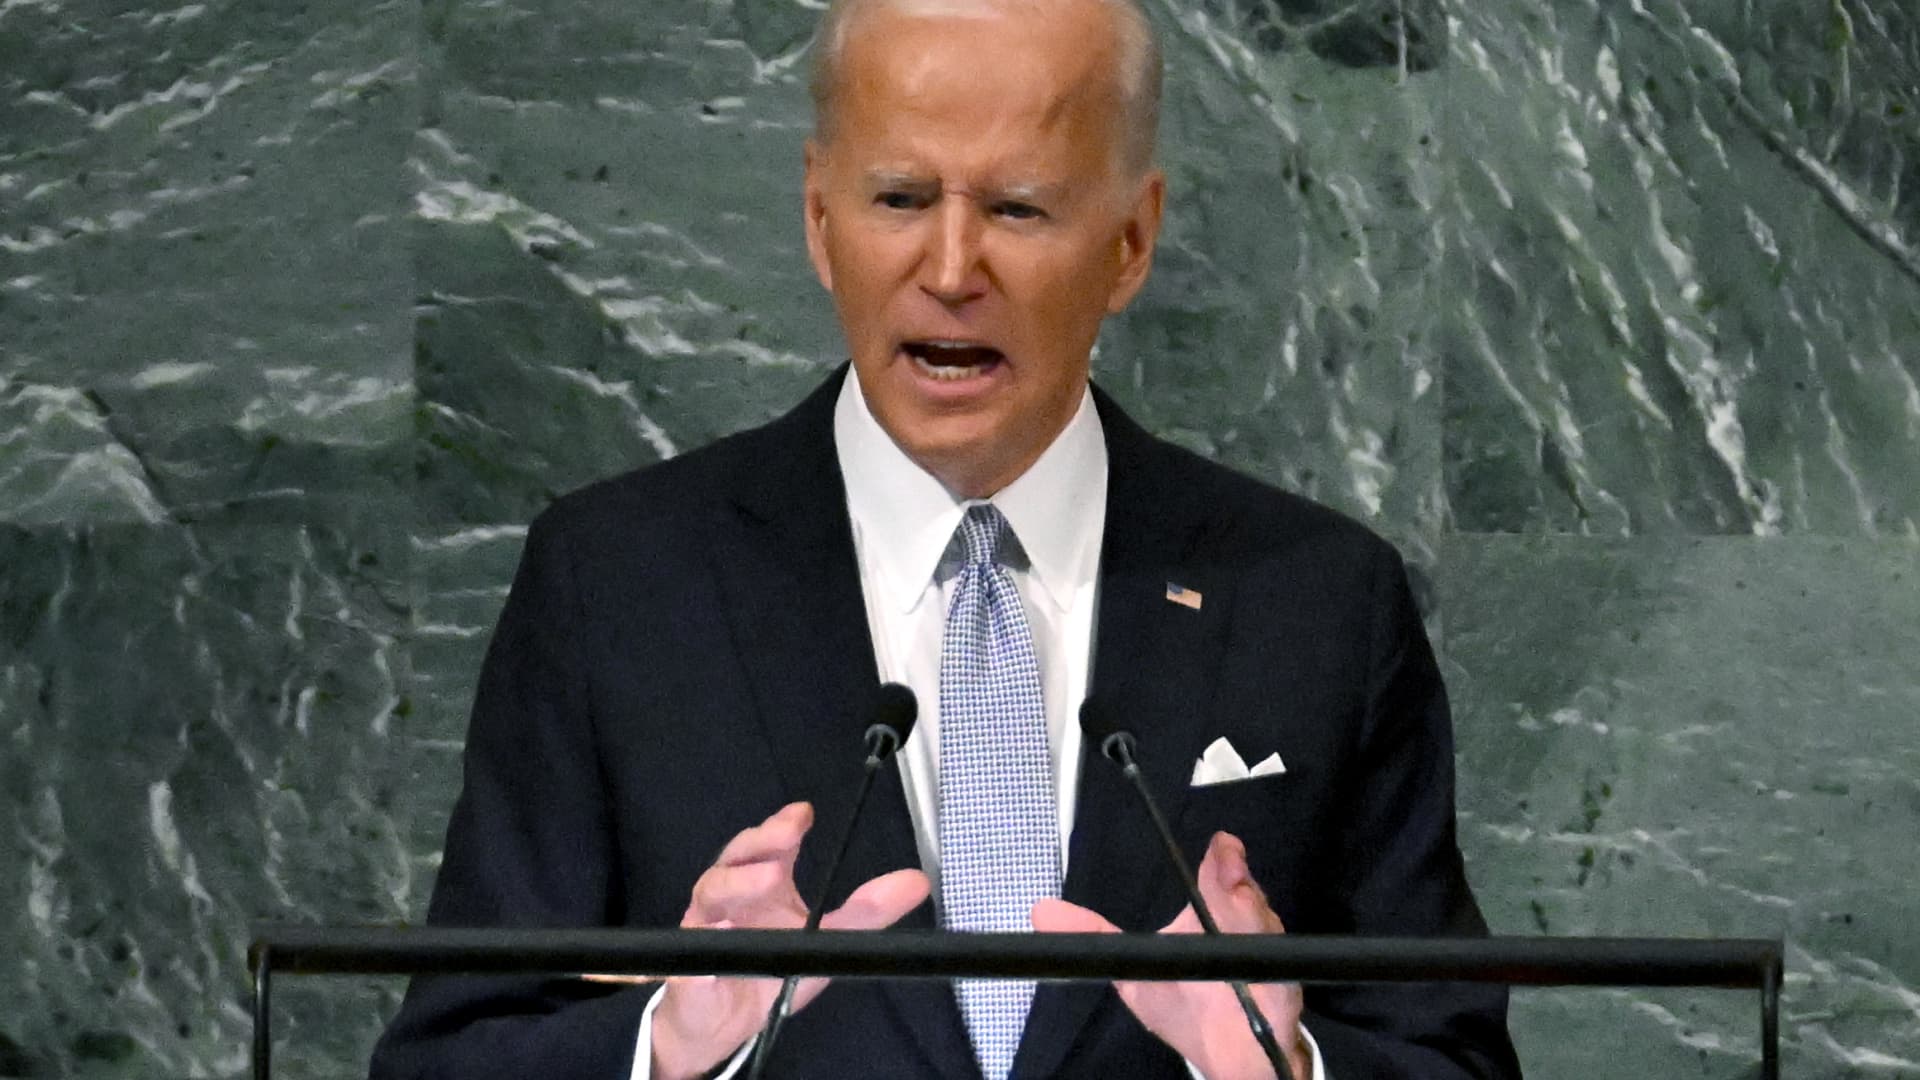 Biden calls on U.N. to stand with Ukraine and unite against Russian aggression